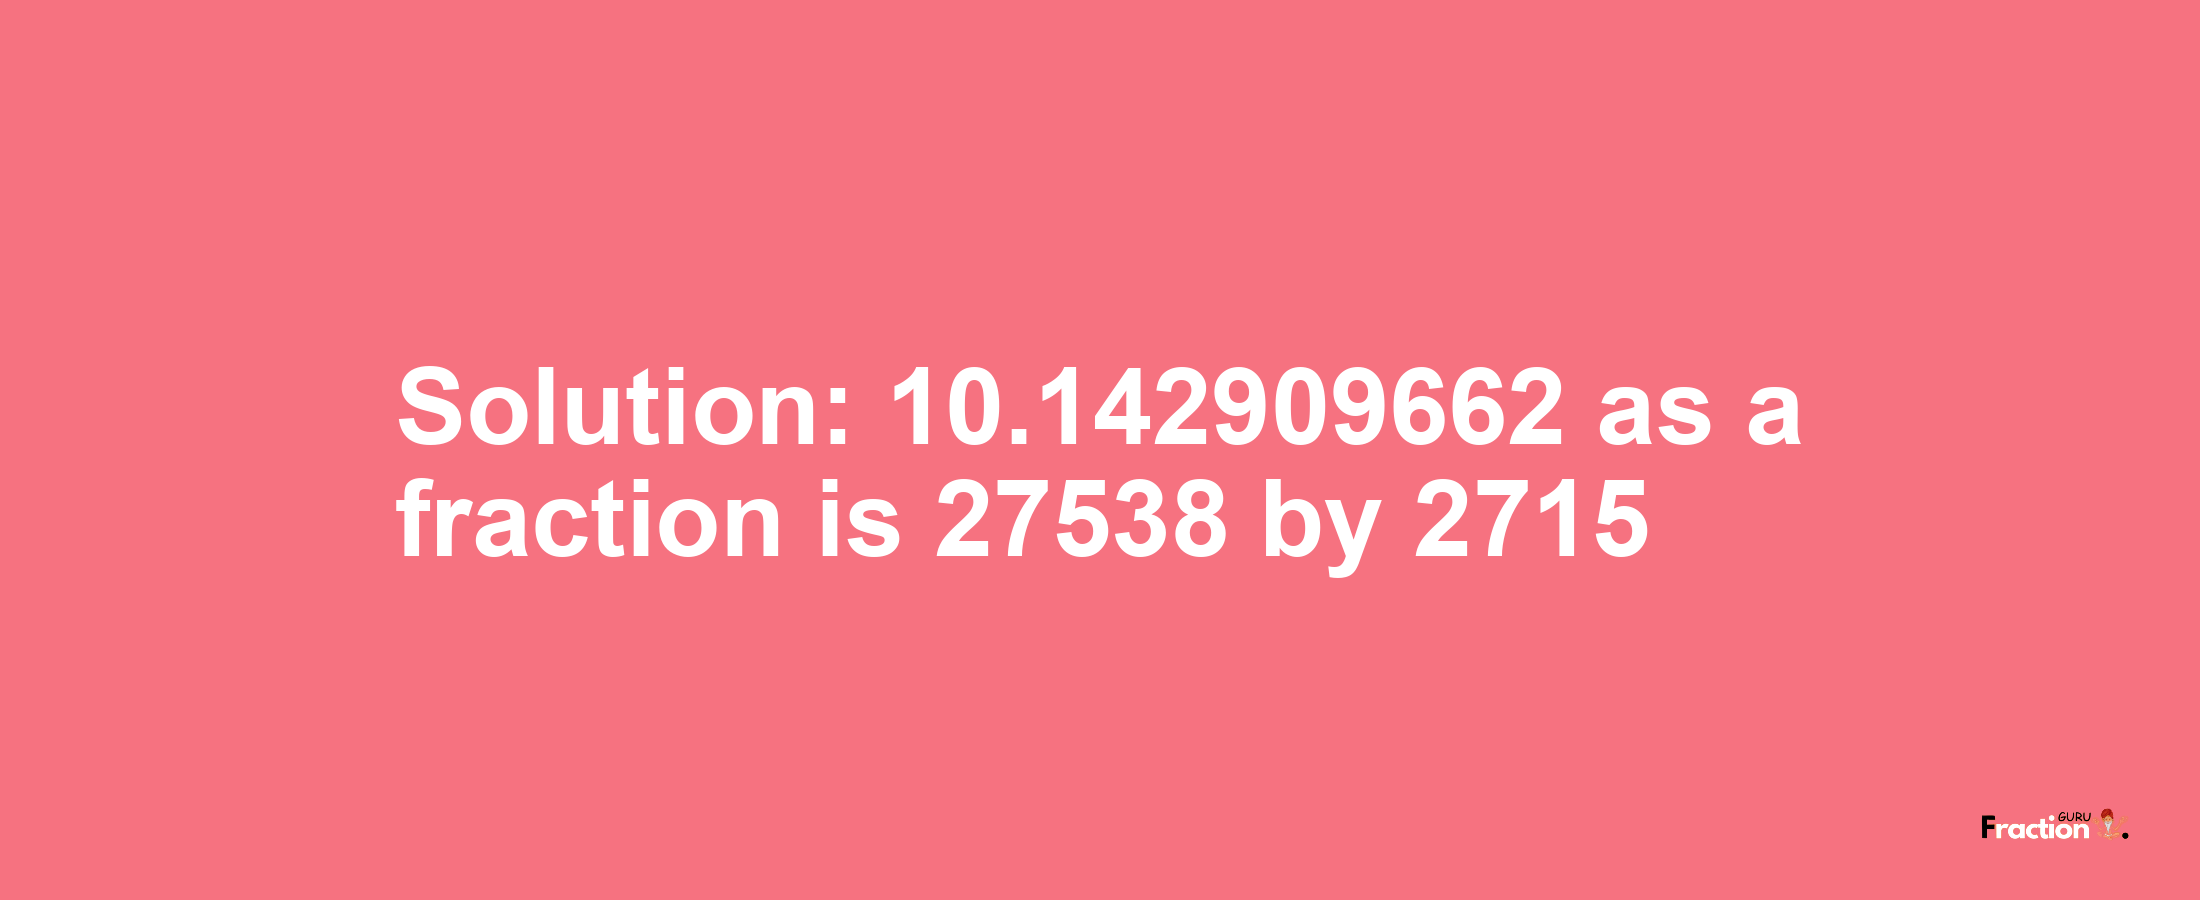 Solution:10.142909662 as a fraction is 27538/2715